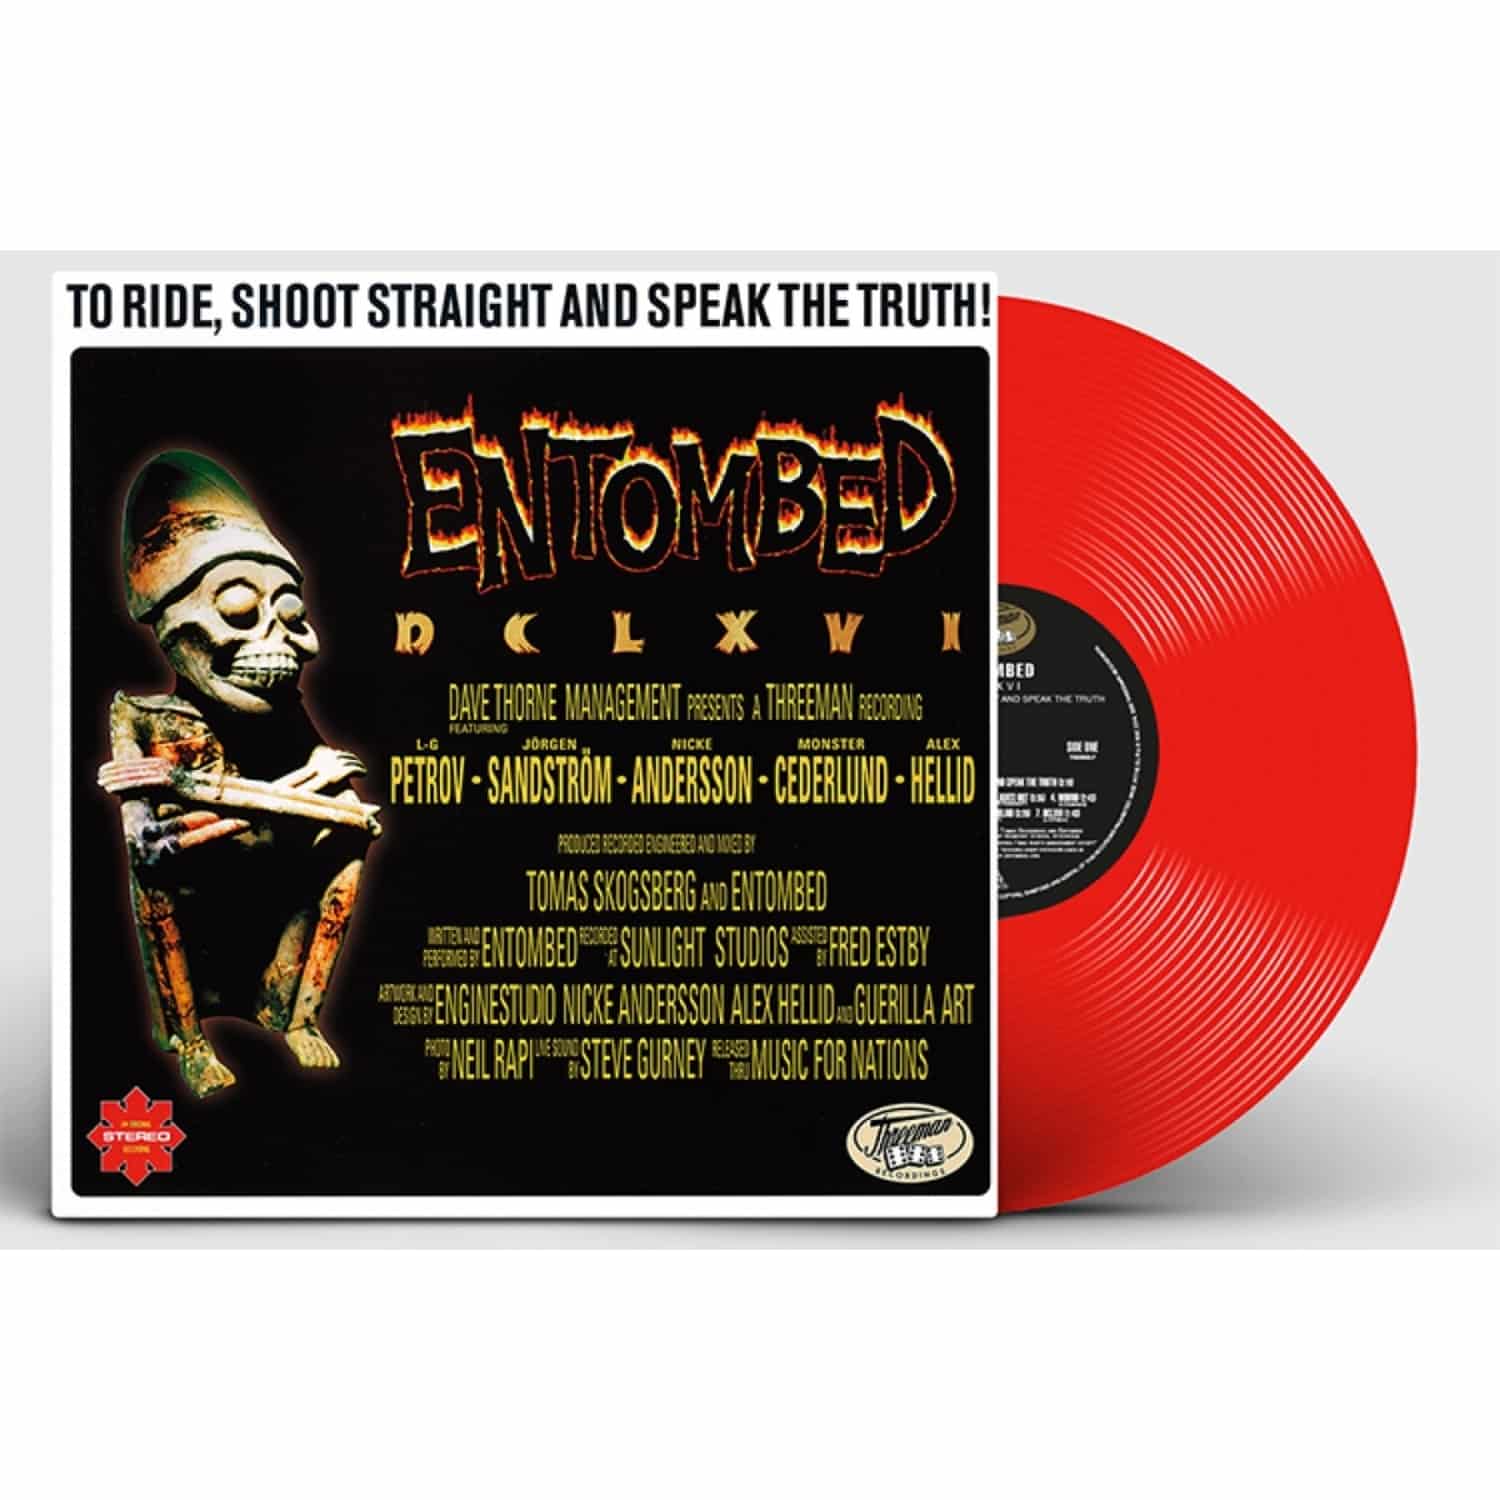 Entombed - DCLXVI TO RIDE, SHOOT STRAIGHT AND SPEAK THE TRUTH 